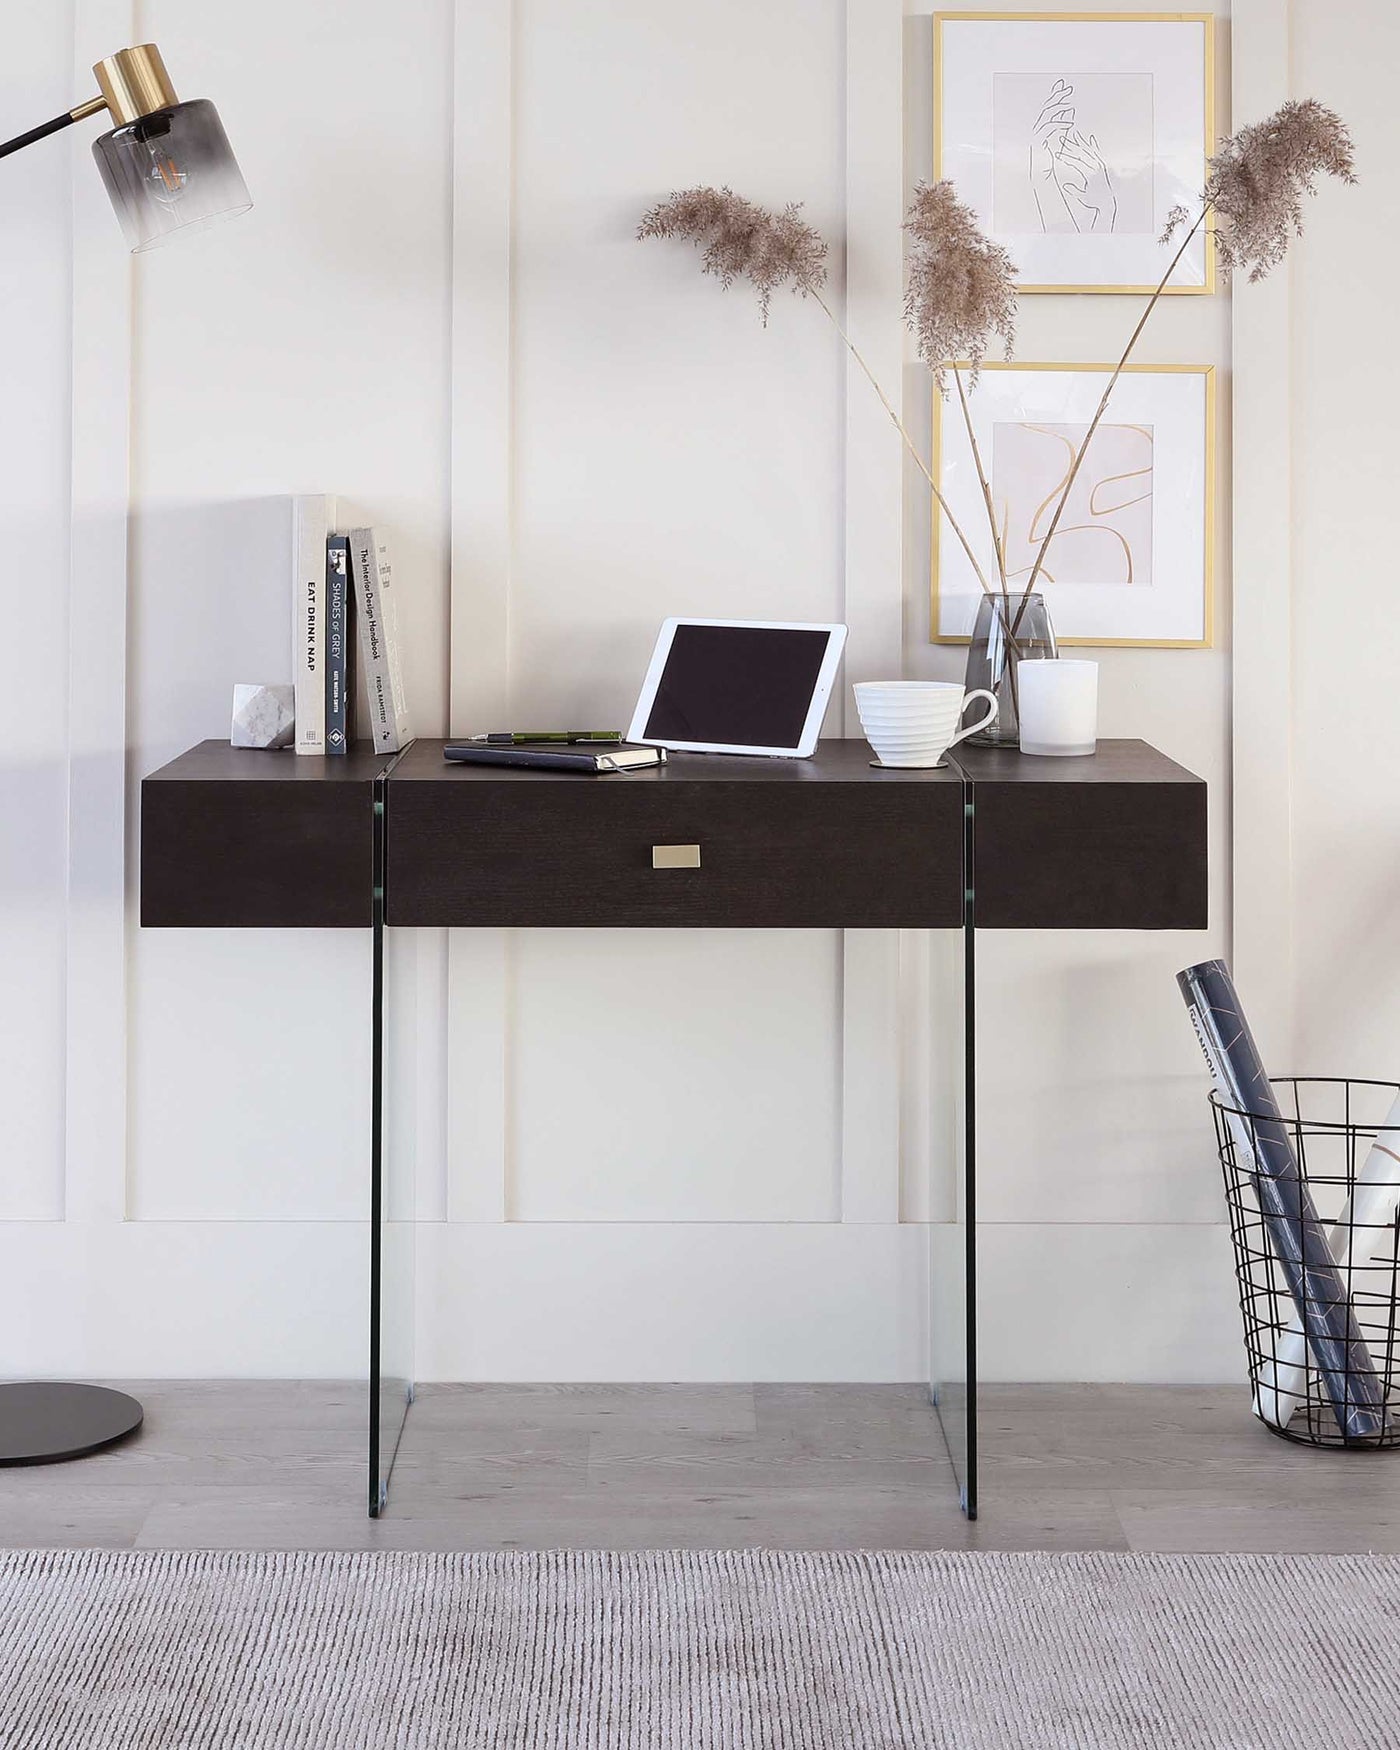 Modern wall-mounted desk in a dark wood finish with sleek brass handles and thin, black metal legs, accompanied by a round metal wire trash bin. A minimalist room decor with neutral colours enhances the contemporary aesthetic of the furniture.